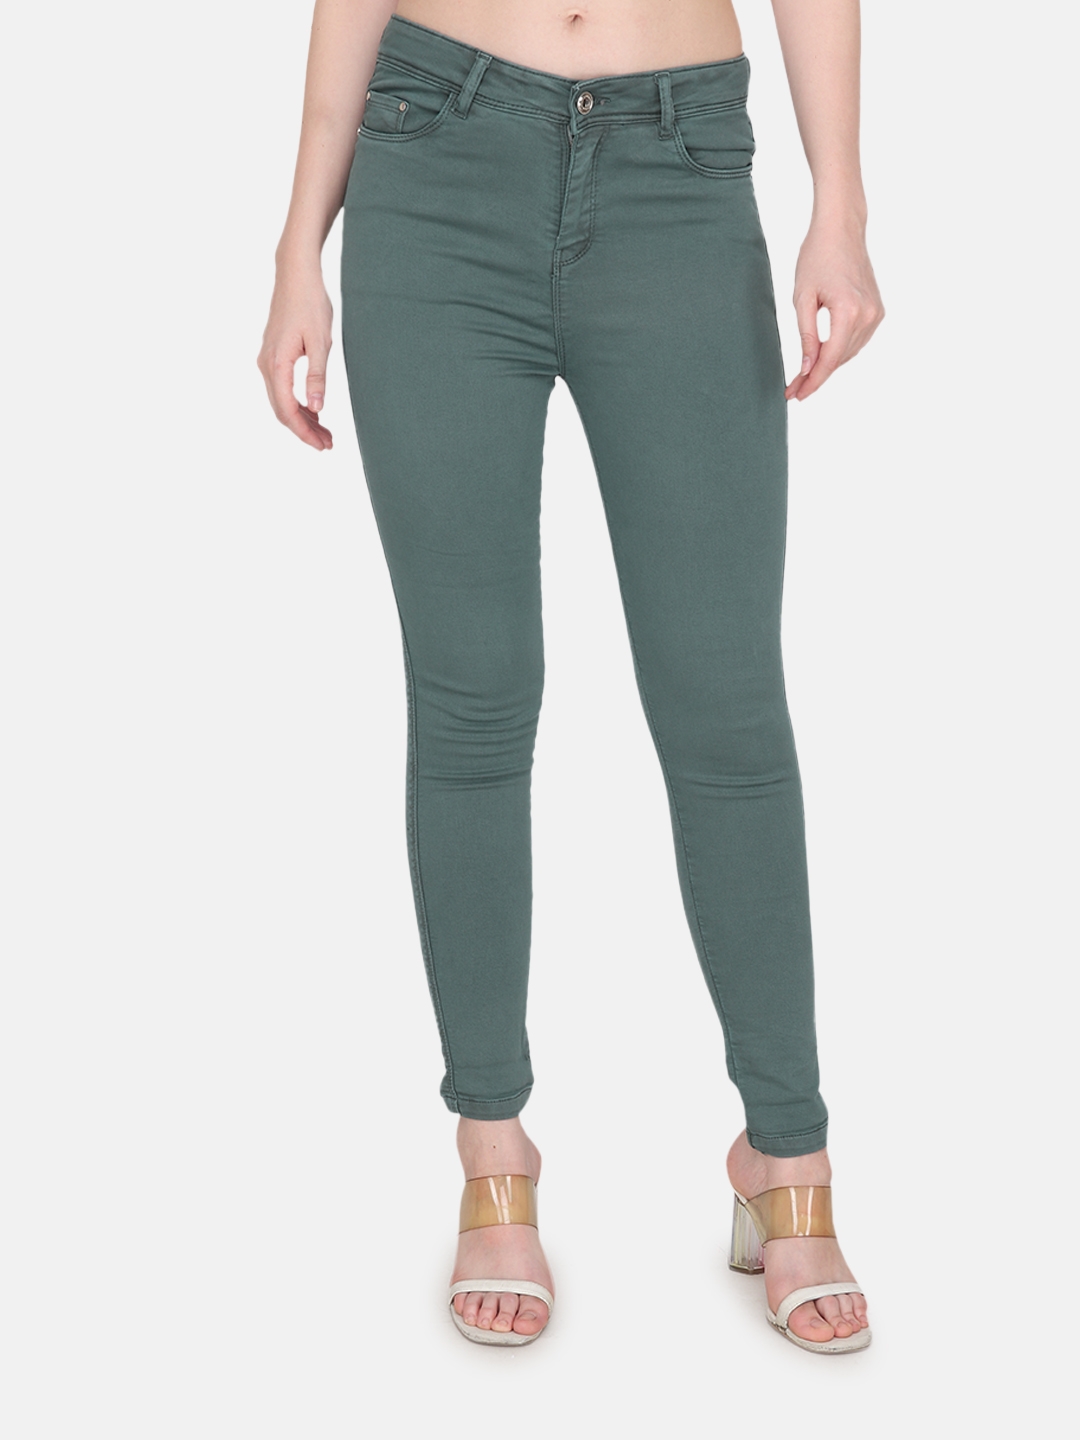 Albion | Albion By CnM Women Green Denim Stretchable Jeans 0